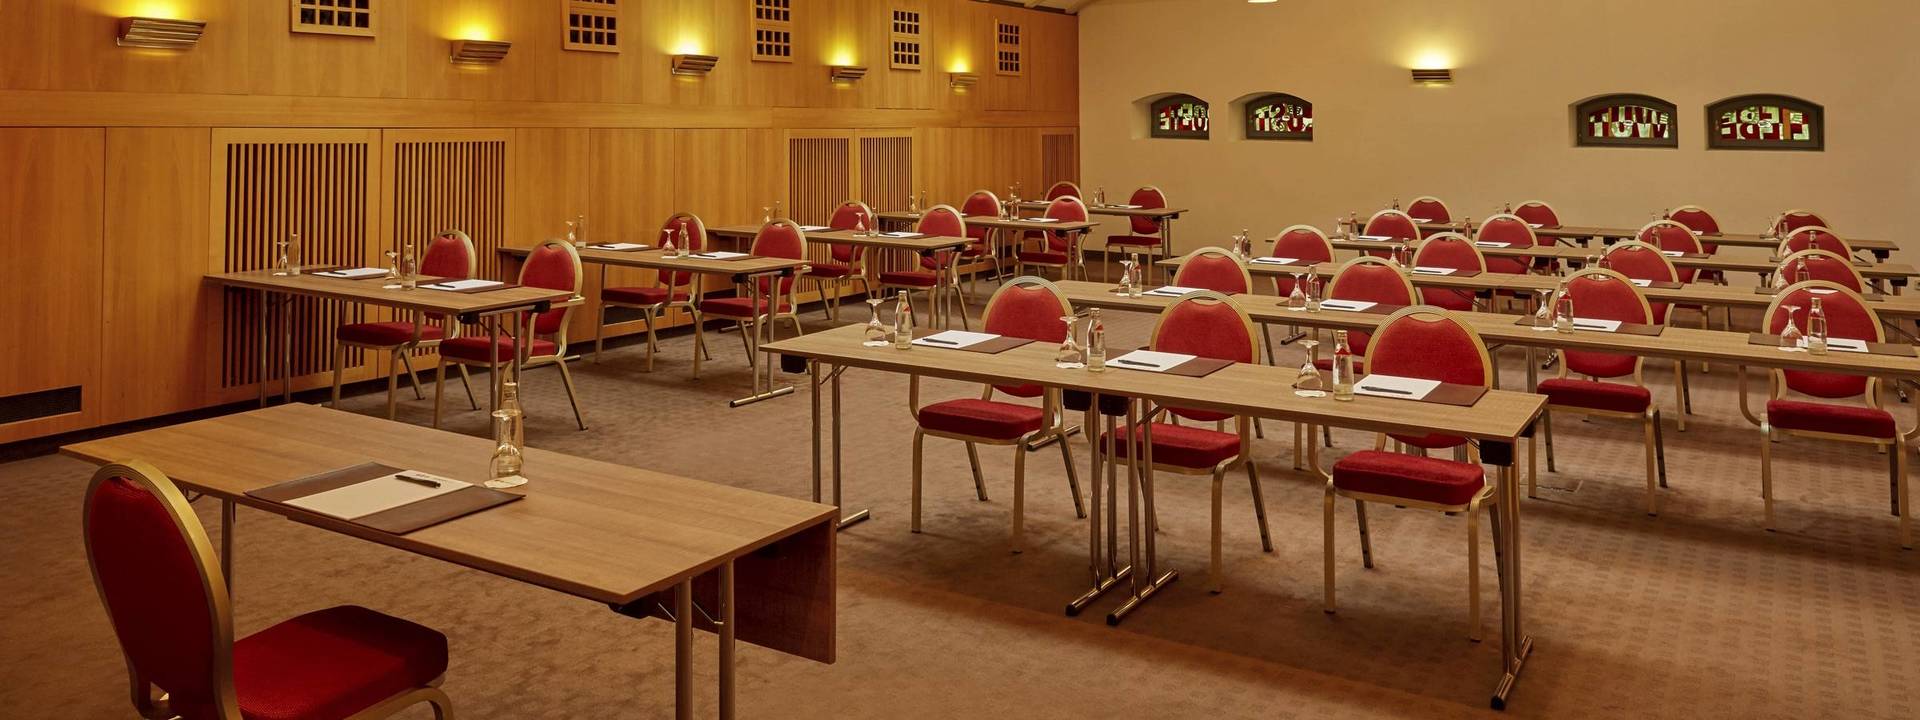 Modern conference rooms - H4 Hotel Residenzschloss Bayreuth - Official website